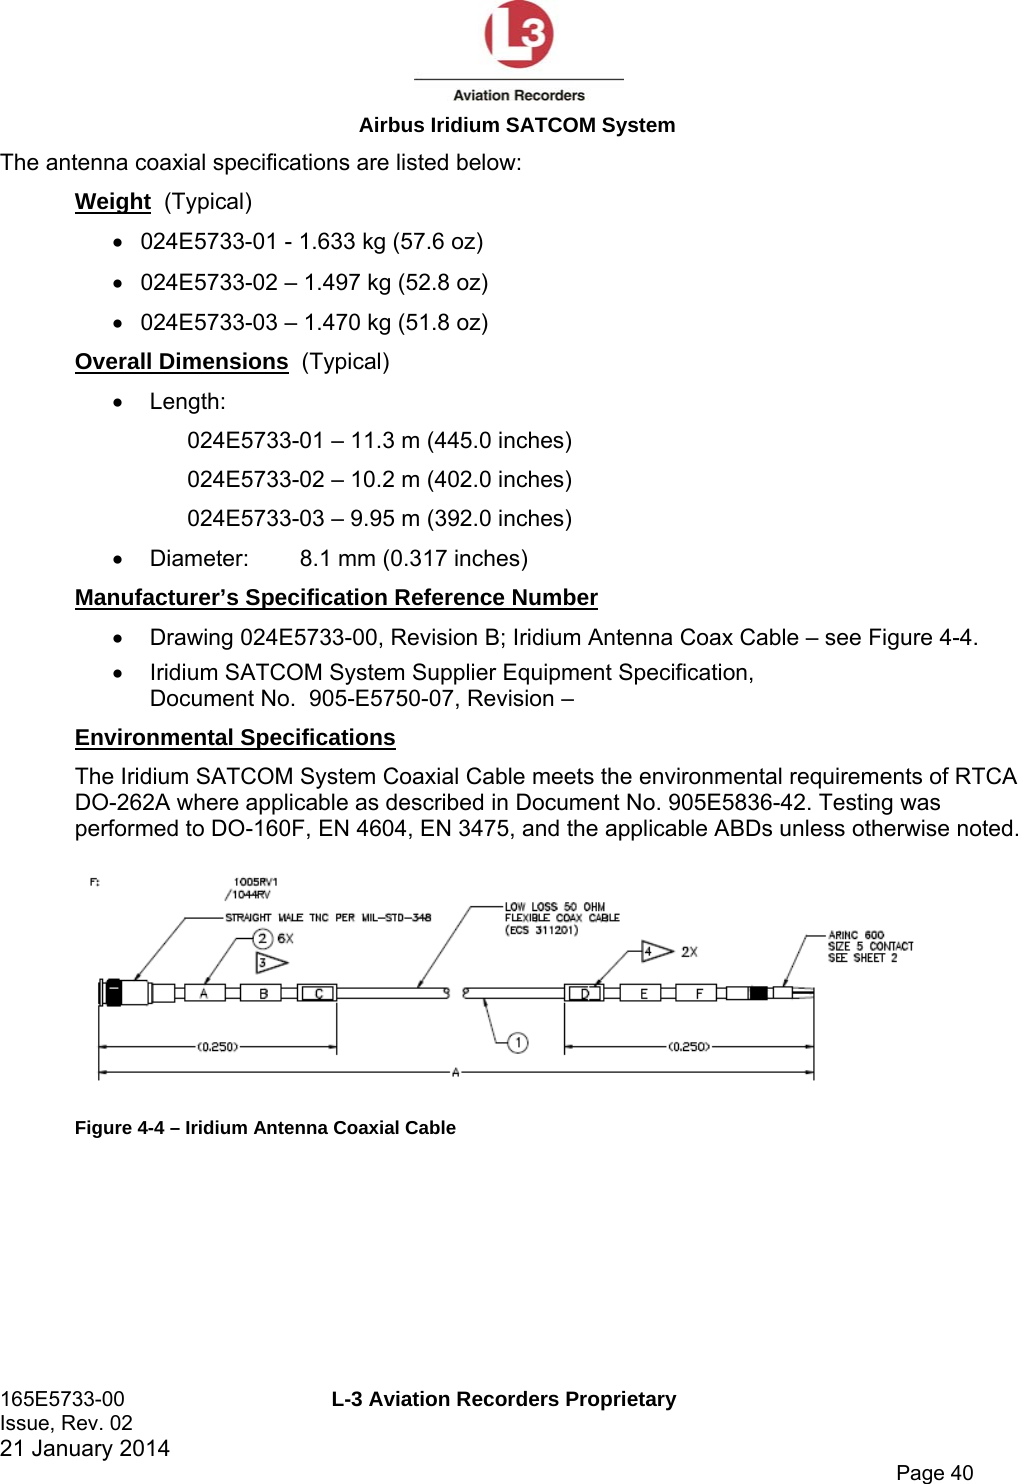  Airbus Iridium SATCOM System 165E5733-00  L-3 Aviation Recorders Proprietary Issue, Rev. 02   21 January 2014      Page 40 The antenna coaxial specifications are listed below: Weight  (Typical)   024E5733-01 - 1.633 kg (57.6 oz)   024E5733-02 – 1.497 kg (52.8 oz)   024E5733-03 – 1.470 kg (51.8 oz) Overall Dimensions  (Typical)  Length:   024E5733-01 – 11.3 m (445.0 inches) 024E5733-02 – 10.2 m (402.0 inches) 024E5733-03 – 9.95 m (392.0 inches)   Diameter:  8.1 mm (0.317 inches) Manufacturer’s Specification Reference Number   Drawing 024E5733-00, Revision B; Iridium Antenna Coax Cable – see Figure 4-4.    Iridium SATCOM System Supplier Equipment Specification,  Document No.  905-E5750-07, Revision –  Environmental Specifications The Iridium SATCOM System Coaxial Cable meets the environmental requirements of RTCA DO-262A where applicable as described in Document No. 905E5836-42. Testing was performed to DO-160F, EN 4604, EN 3475, and the applicable ABDs unless otherwise noted.    Figure 4-4 – Iridium Antenna Coaxial Cable    